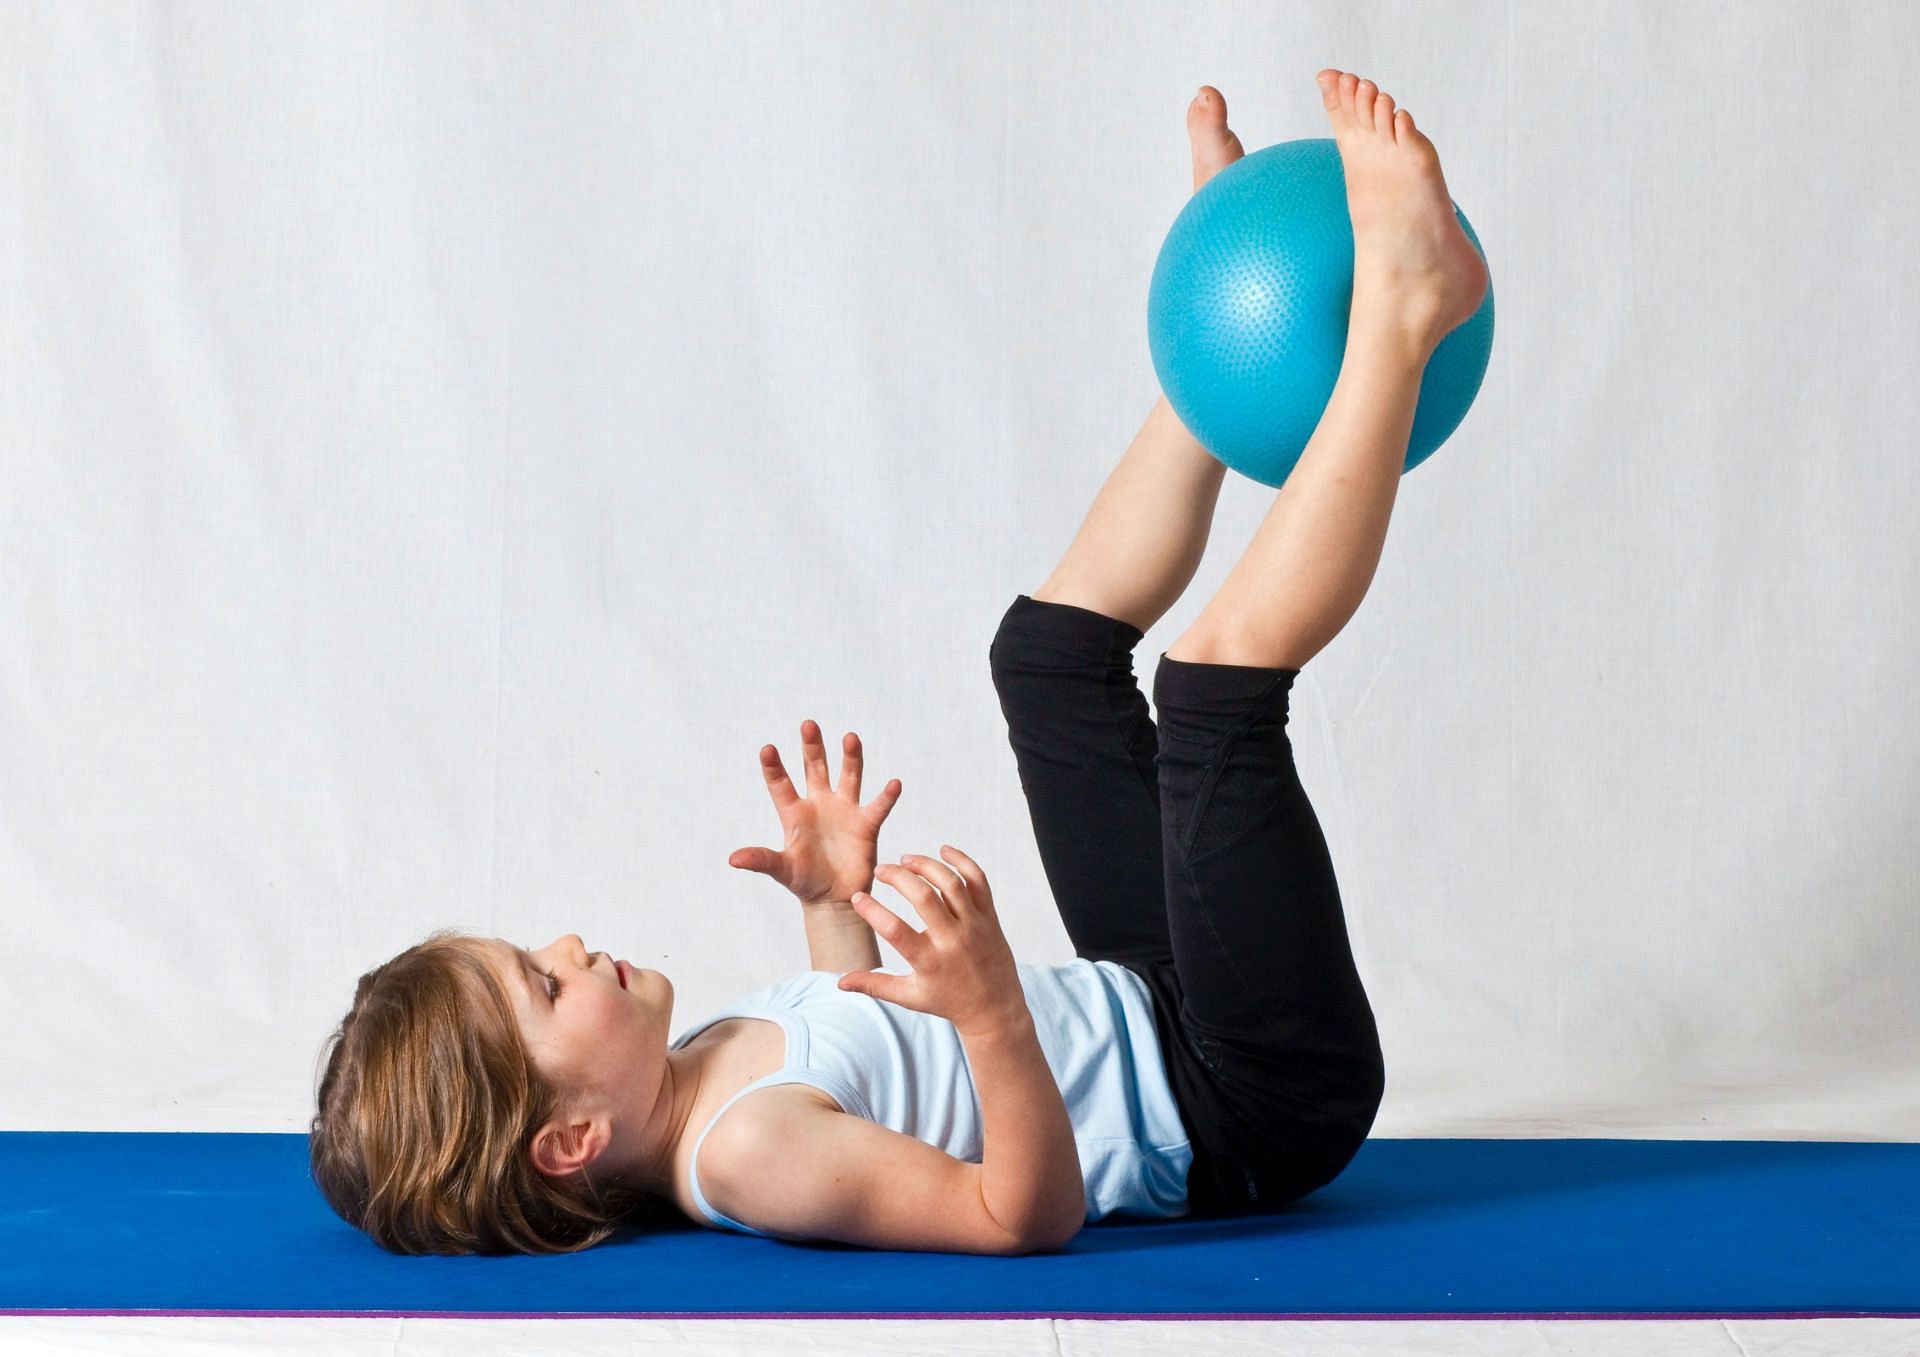 Some yoga ball exercises are specifically meant to increase core strength (Image via Pexels@Lena Helfinger)